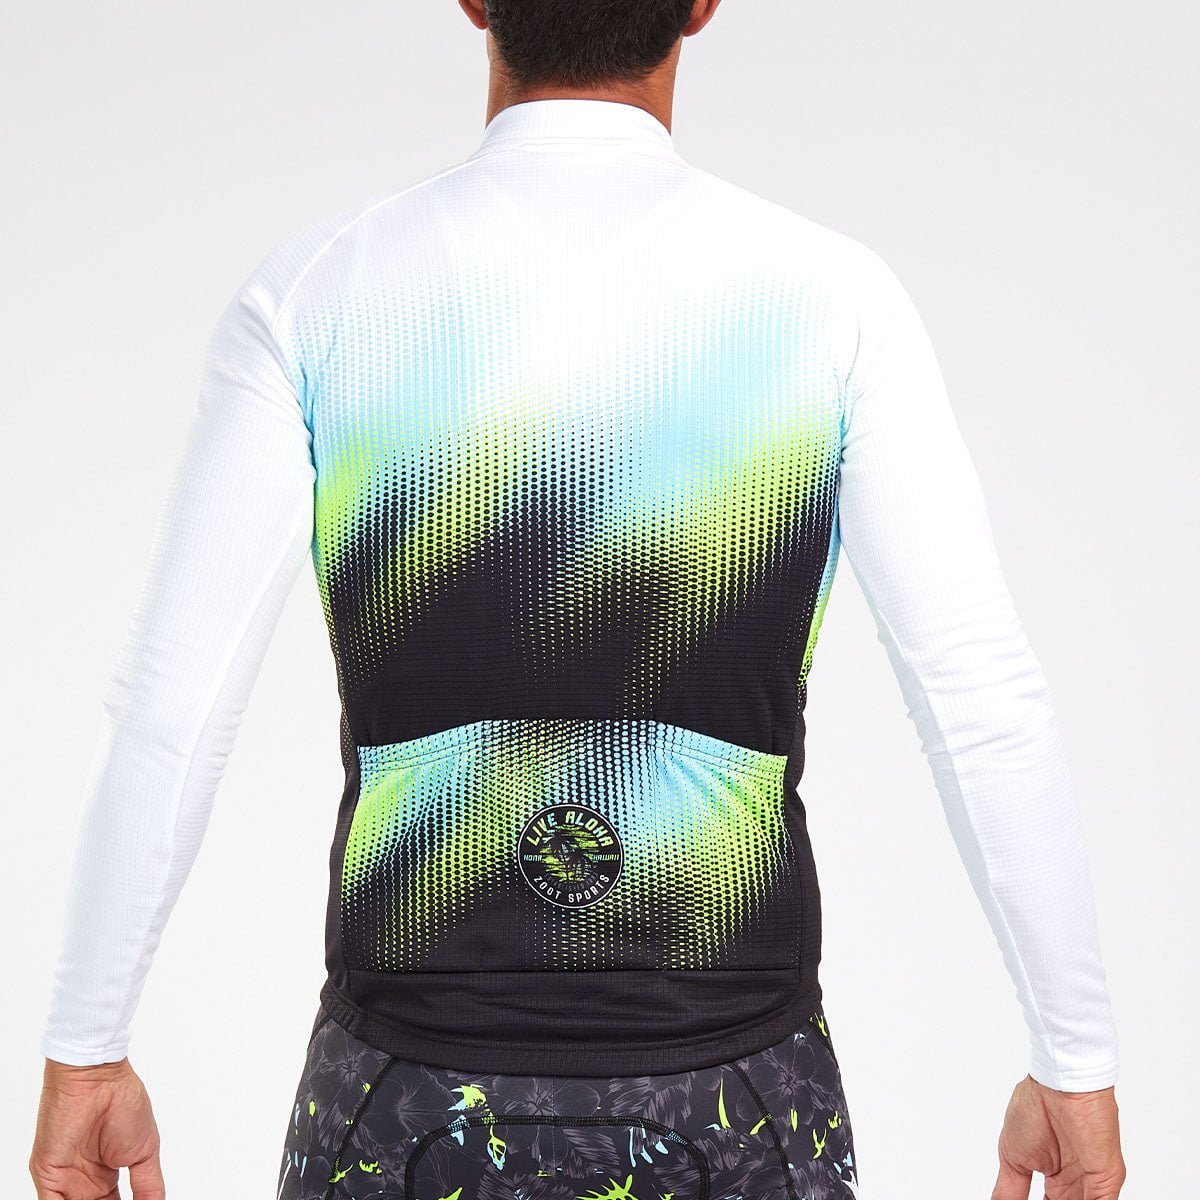 Zoot Sports CYCLE TOPS MENS LTD CYCLE THERMO JERSEY - LIVE ALOHA